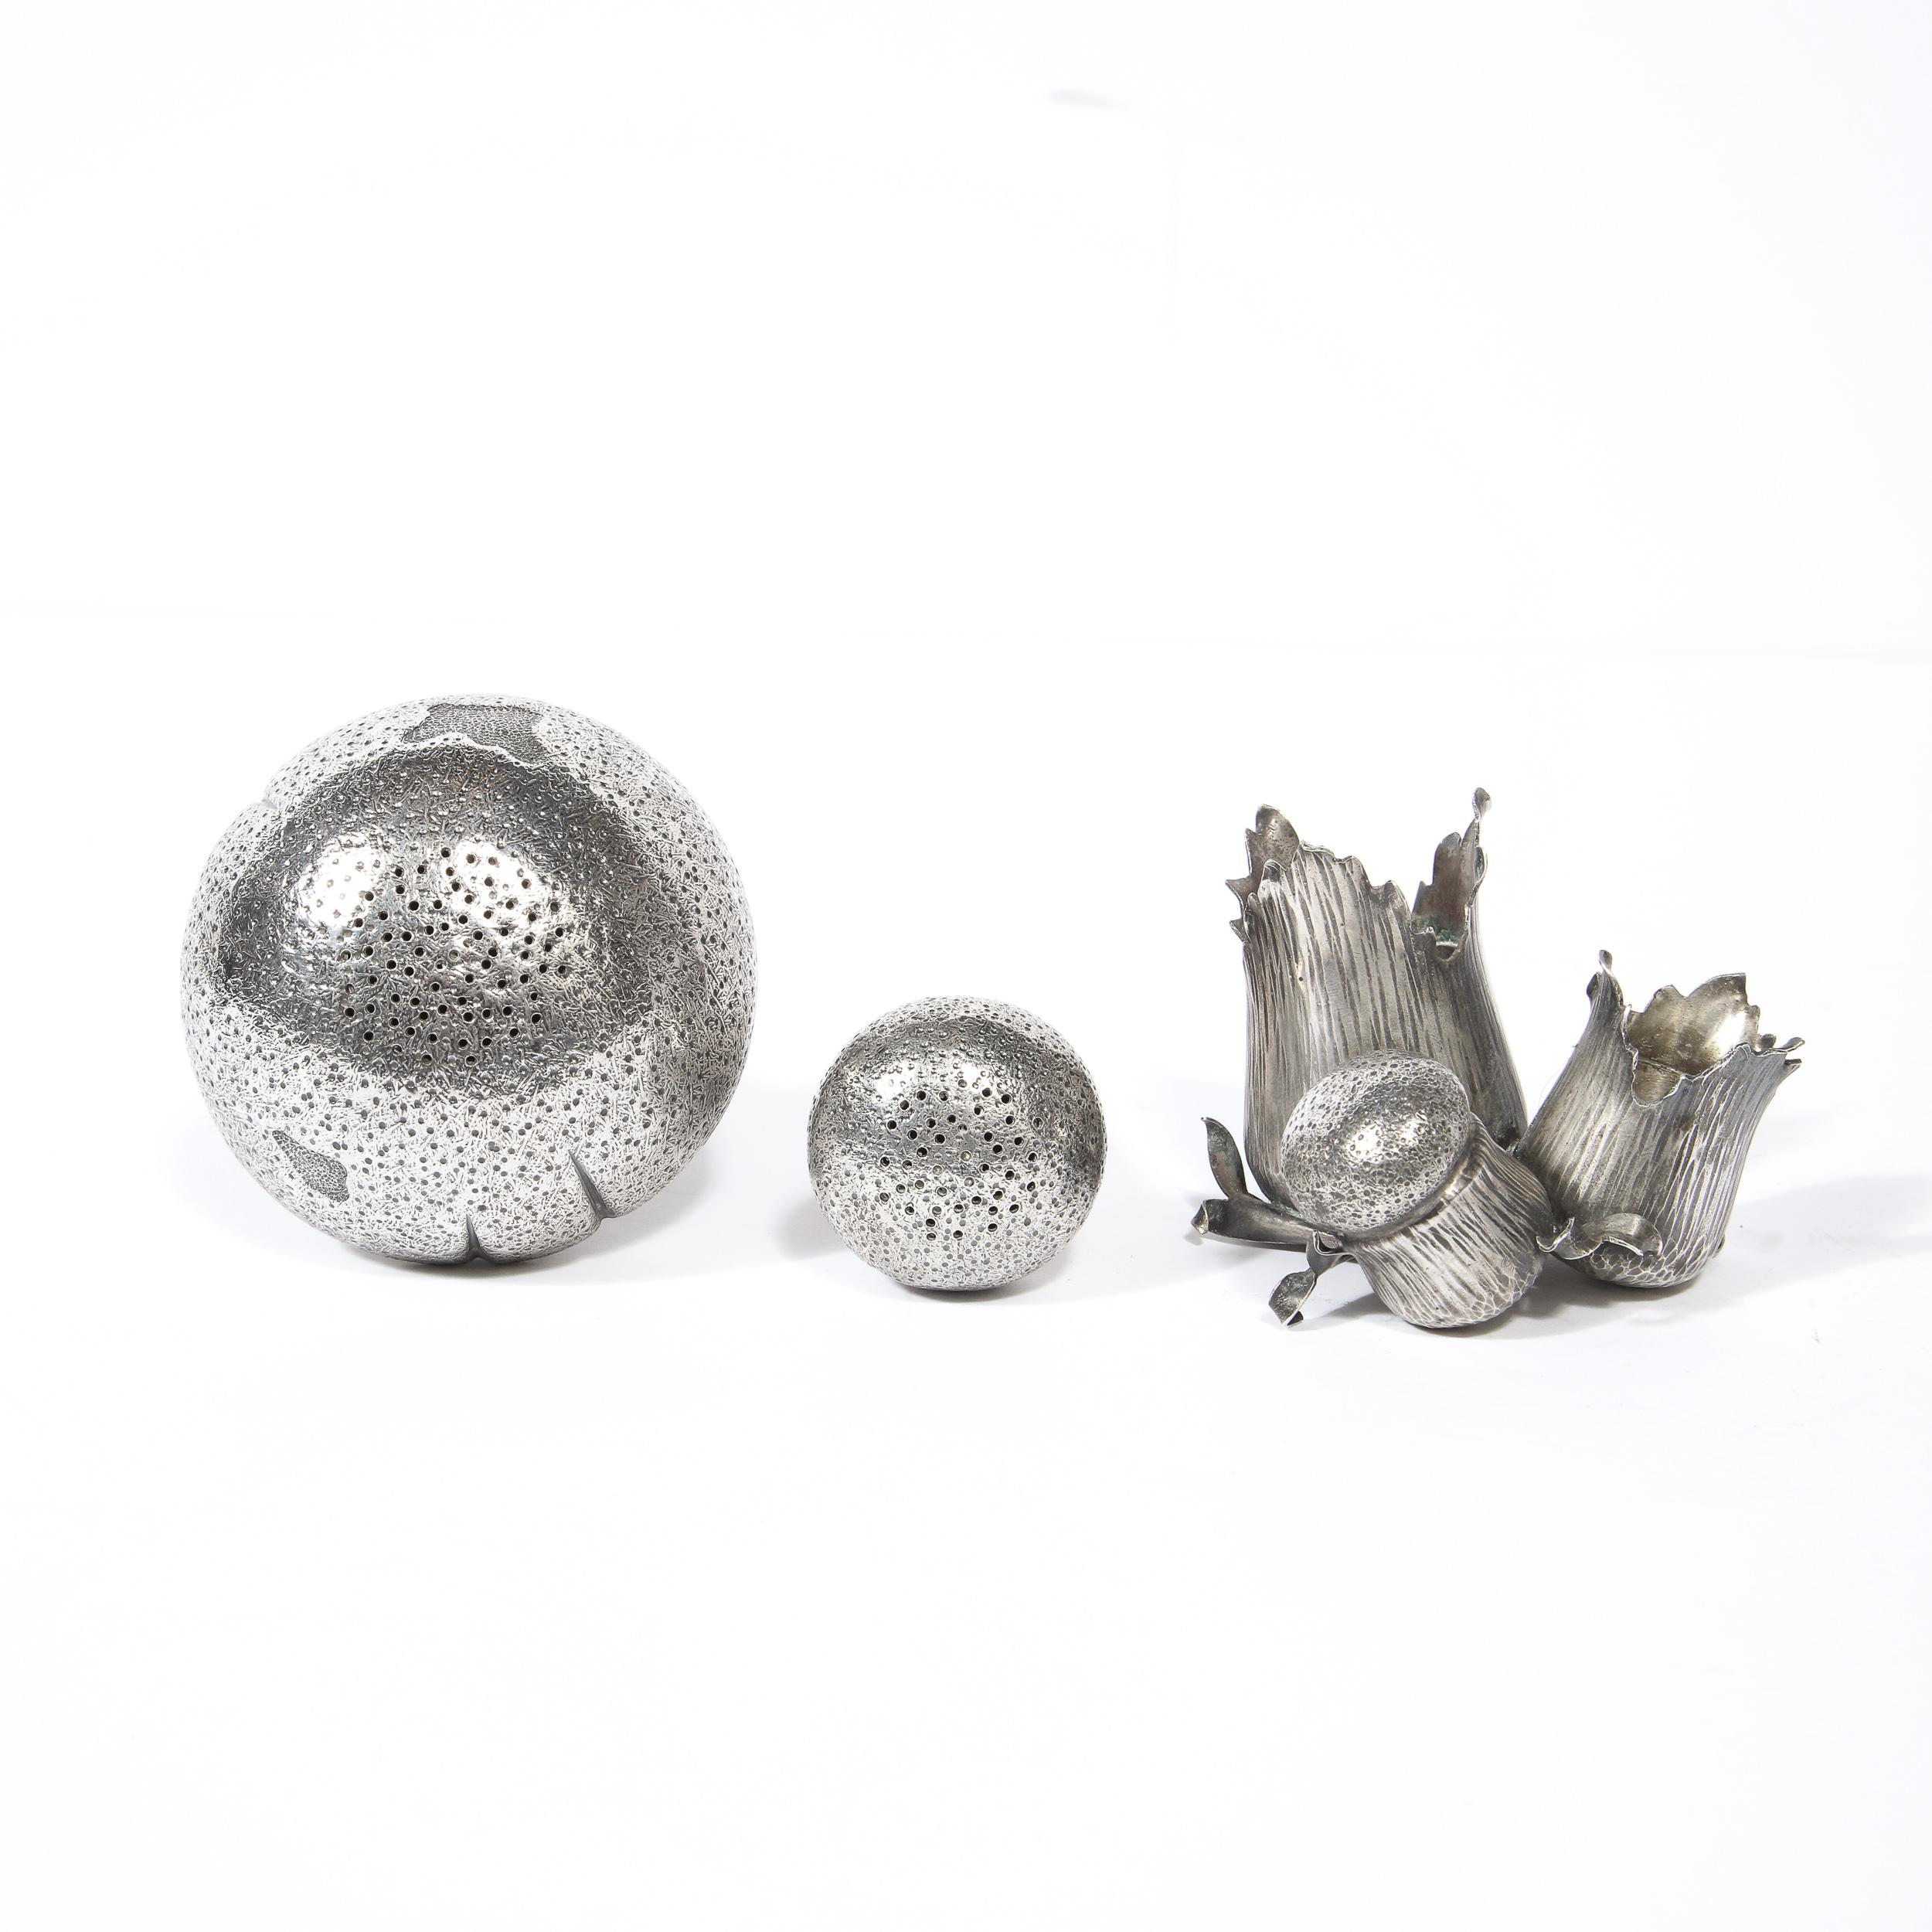 Hand-Wrought Sterling Silver Mushroom Salt & Pepper Shaker Signed by Buccellati In Excellent Condition For Sale In New York, NY